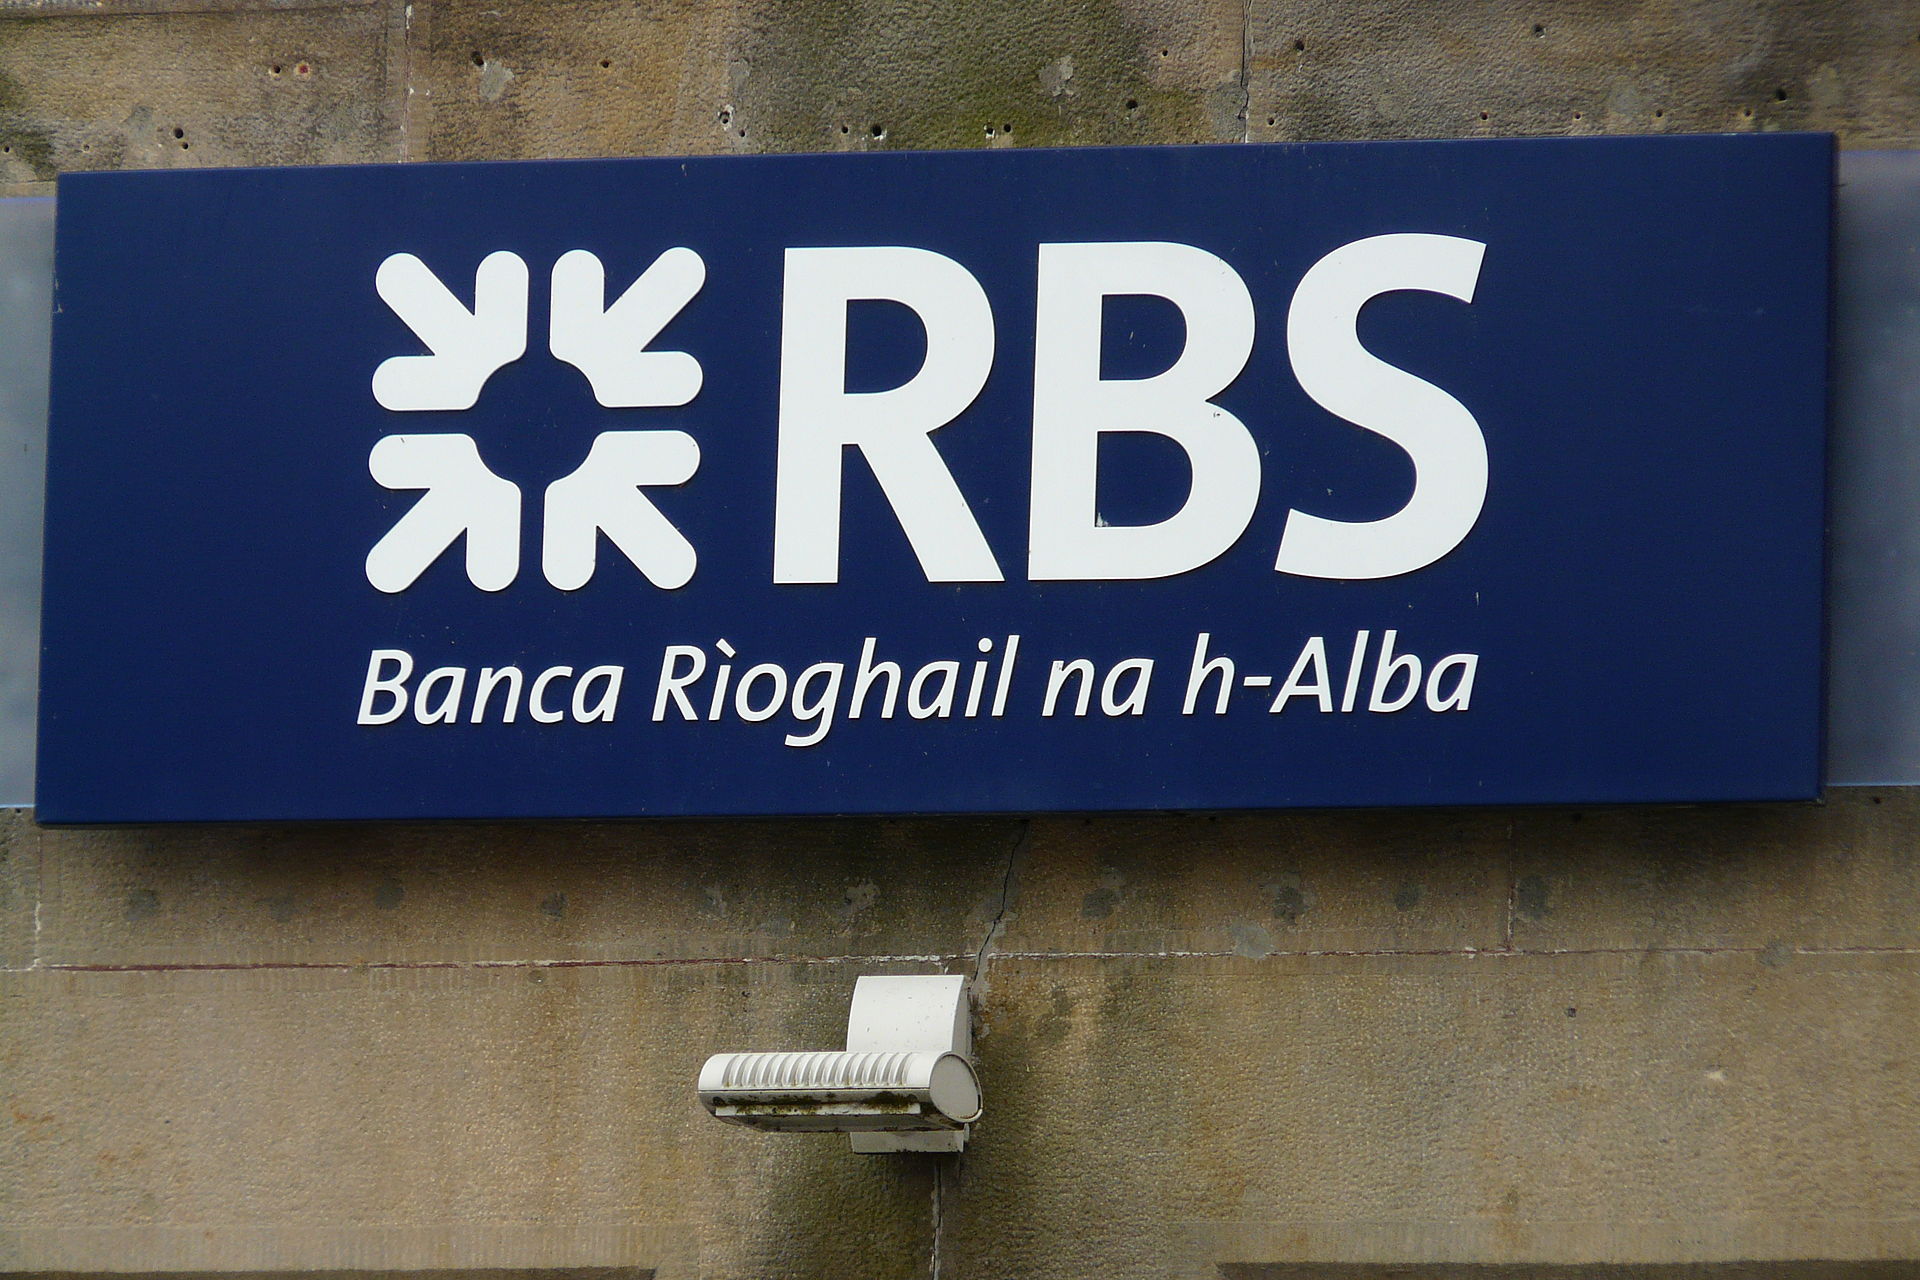 RBS offers a boost to small business growth in the North East